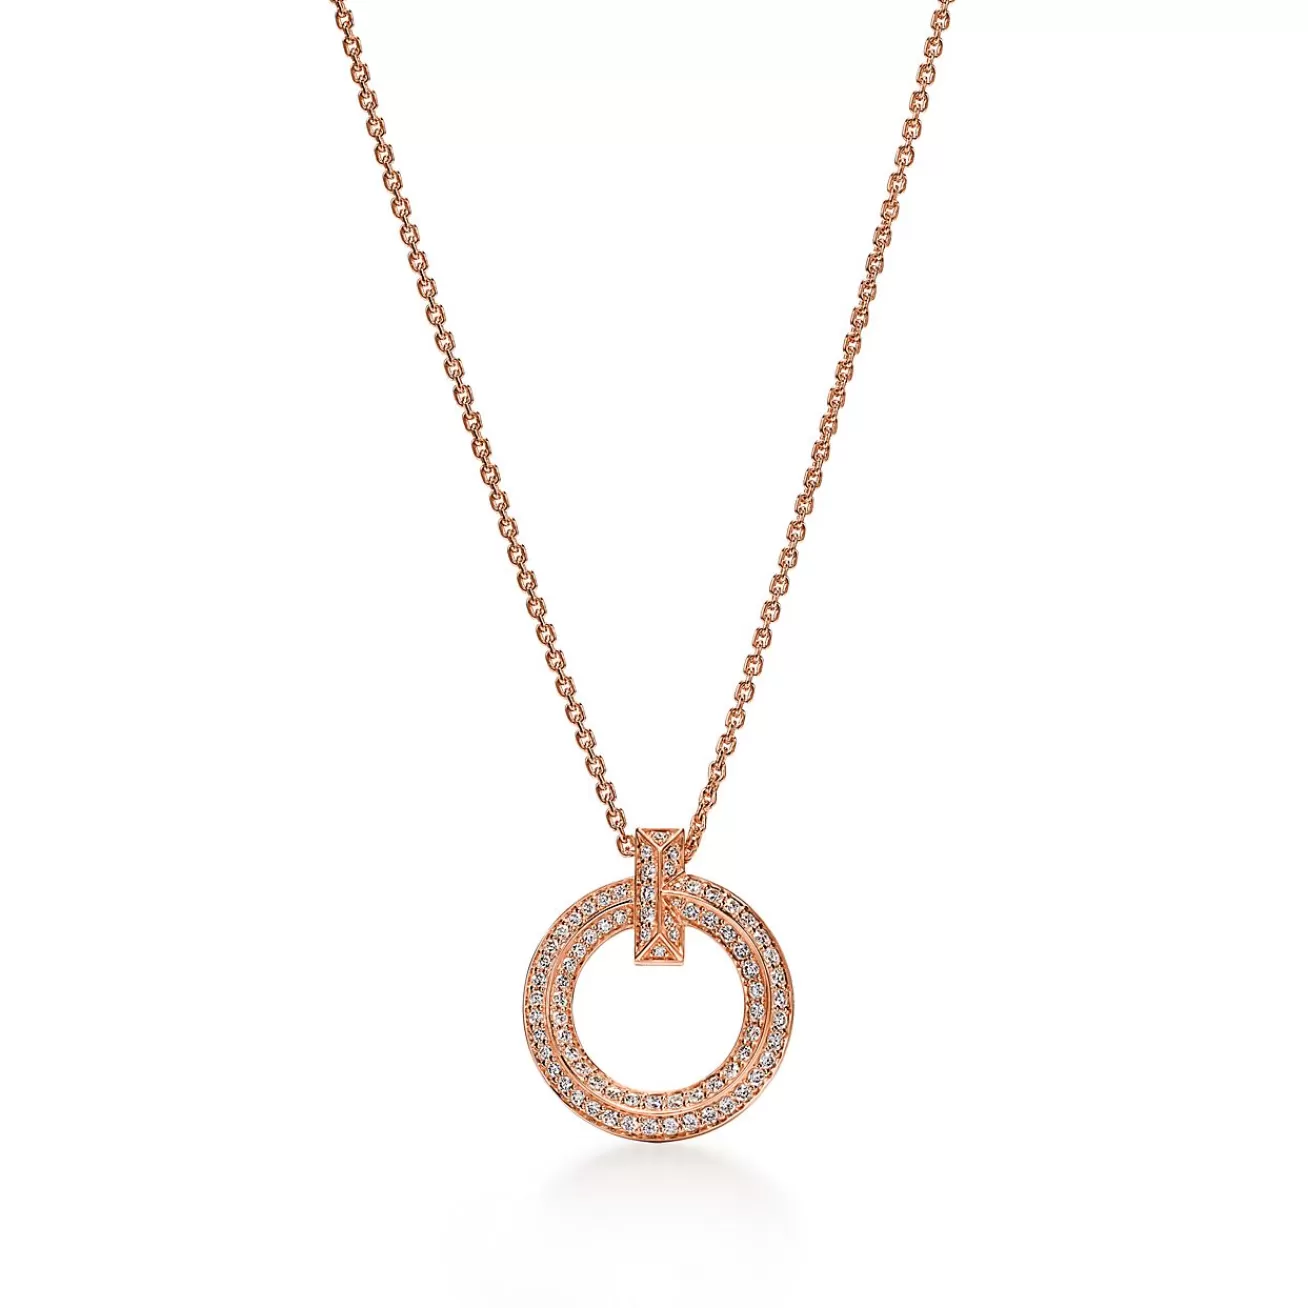 Tiffany & Co. Tiffany T T1 Circle Pendant in Rose Gold with Pavé Diamonds | ^ Necklaces & Pendants | Rose Gold Jewelry